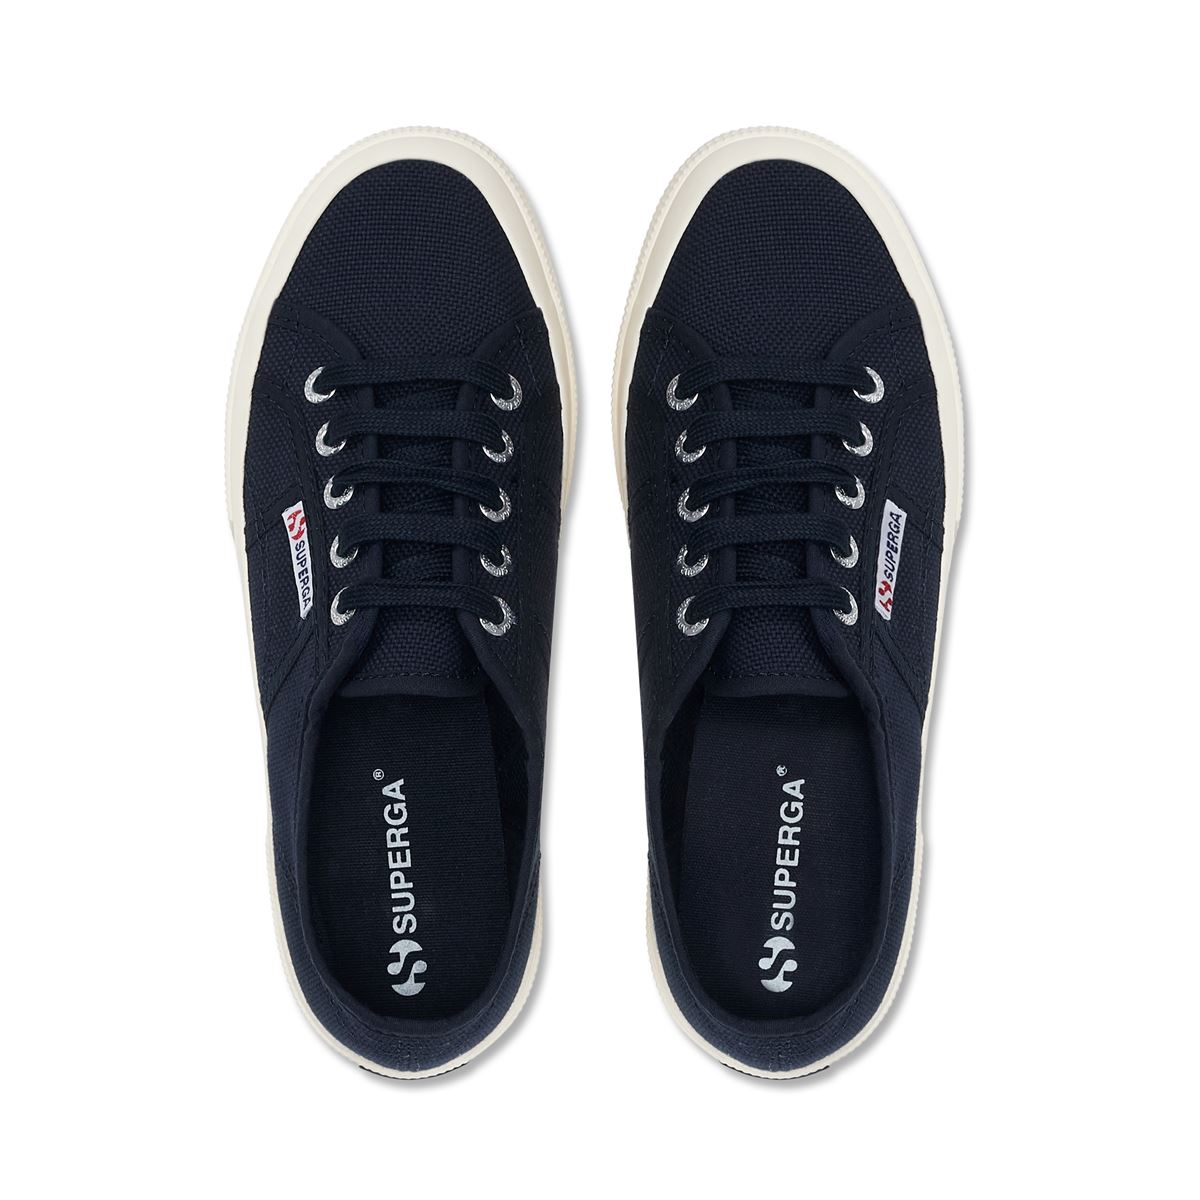 Superga 2750 Cotu Classic Sneakers - Navy Off White. Top view.